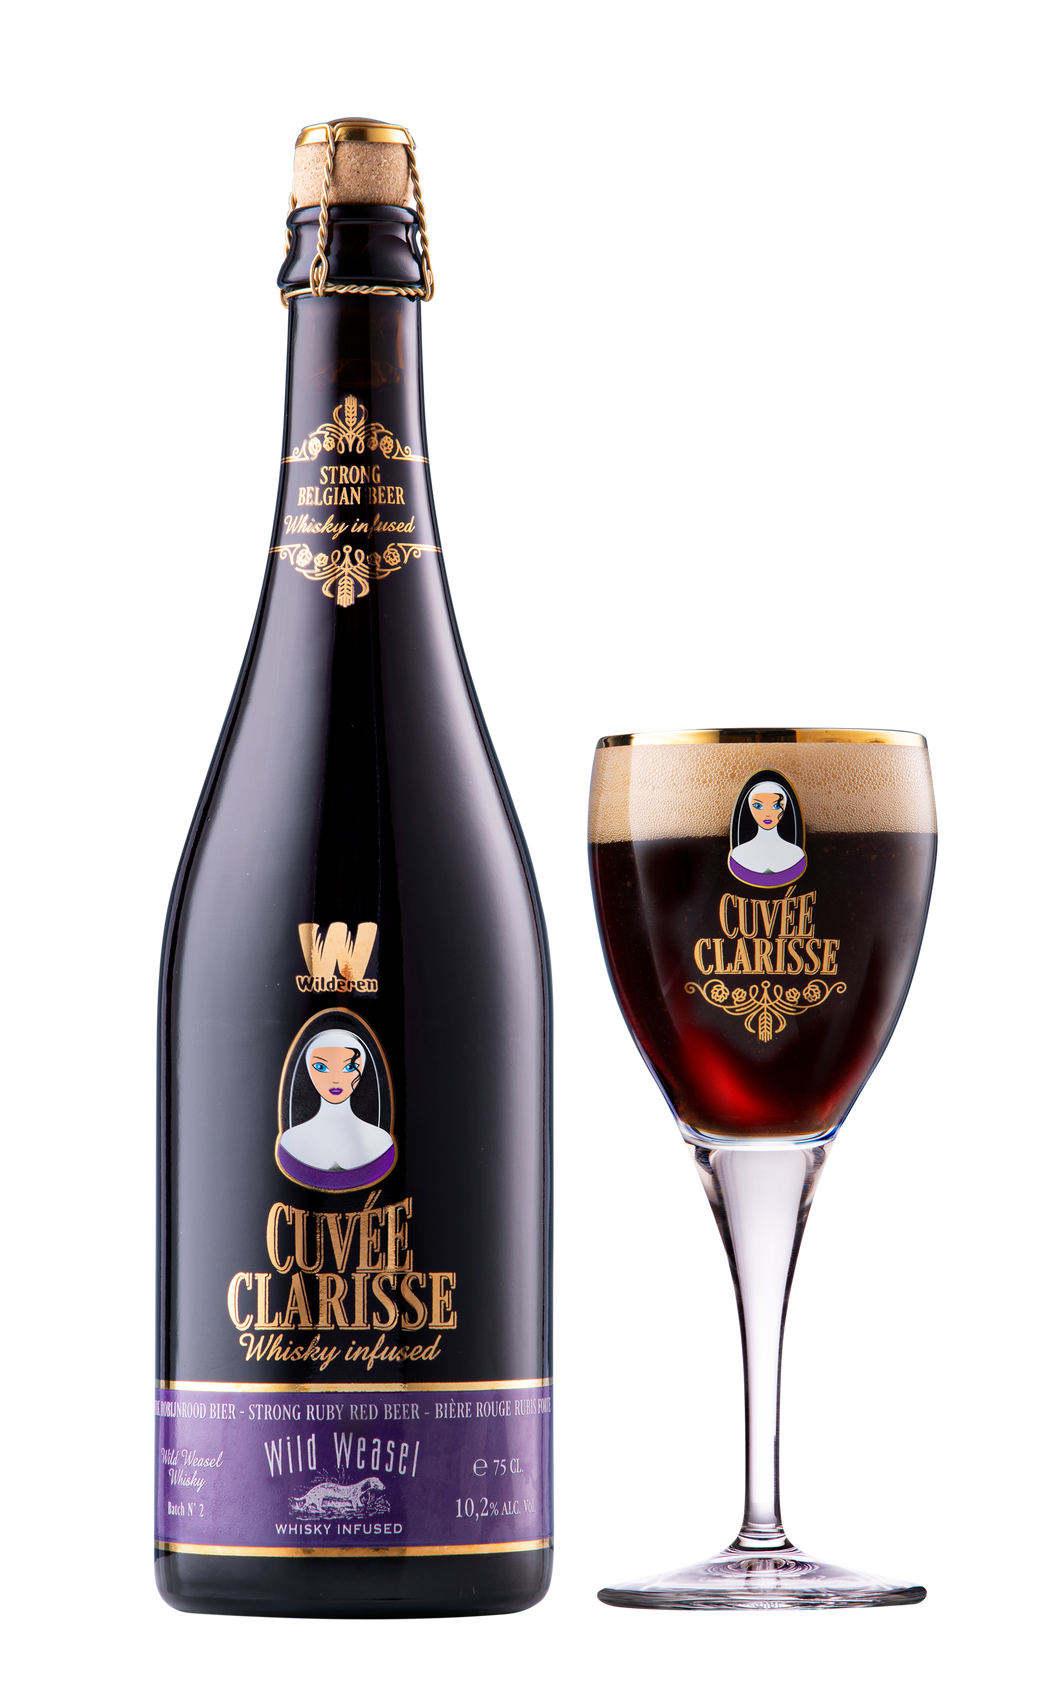 Cuvée Clarisse Whisky Infused 10,2% 75cl